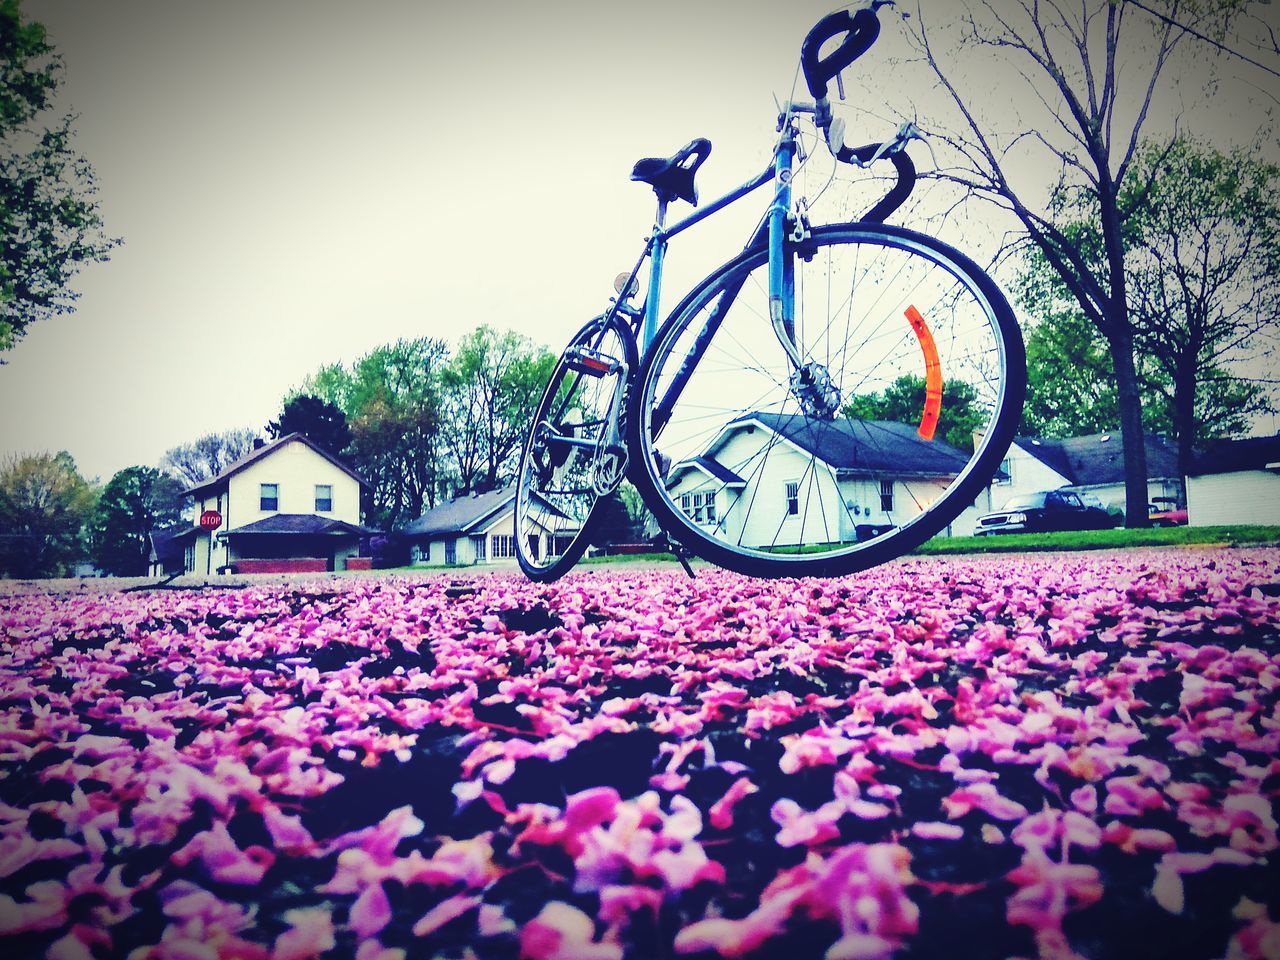 CLOSE-UP OF PINK FLOWERING PLANTS BY BICYCLE